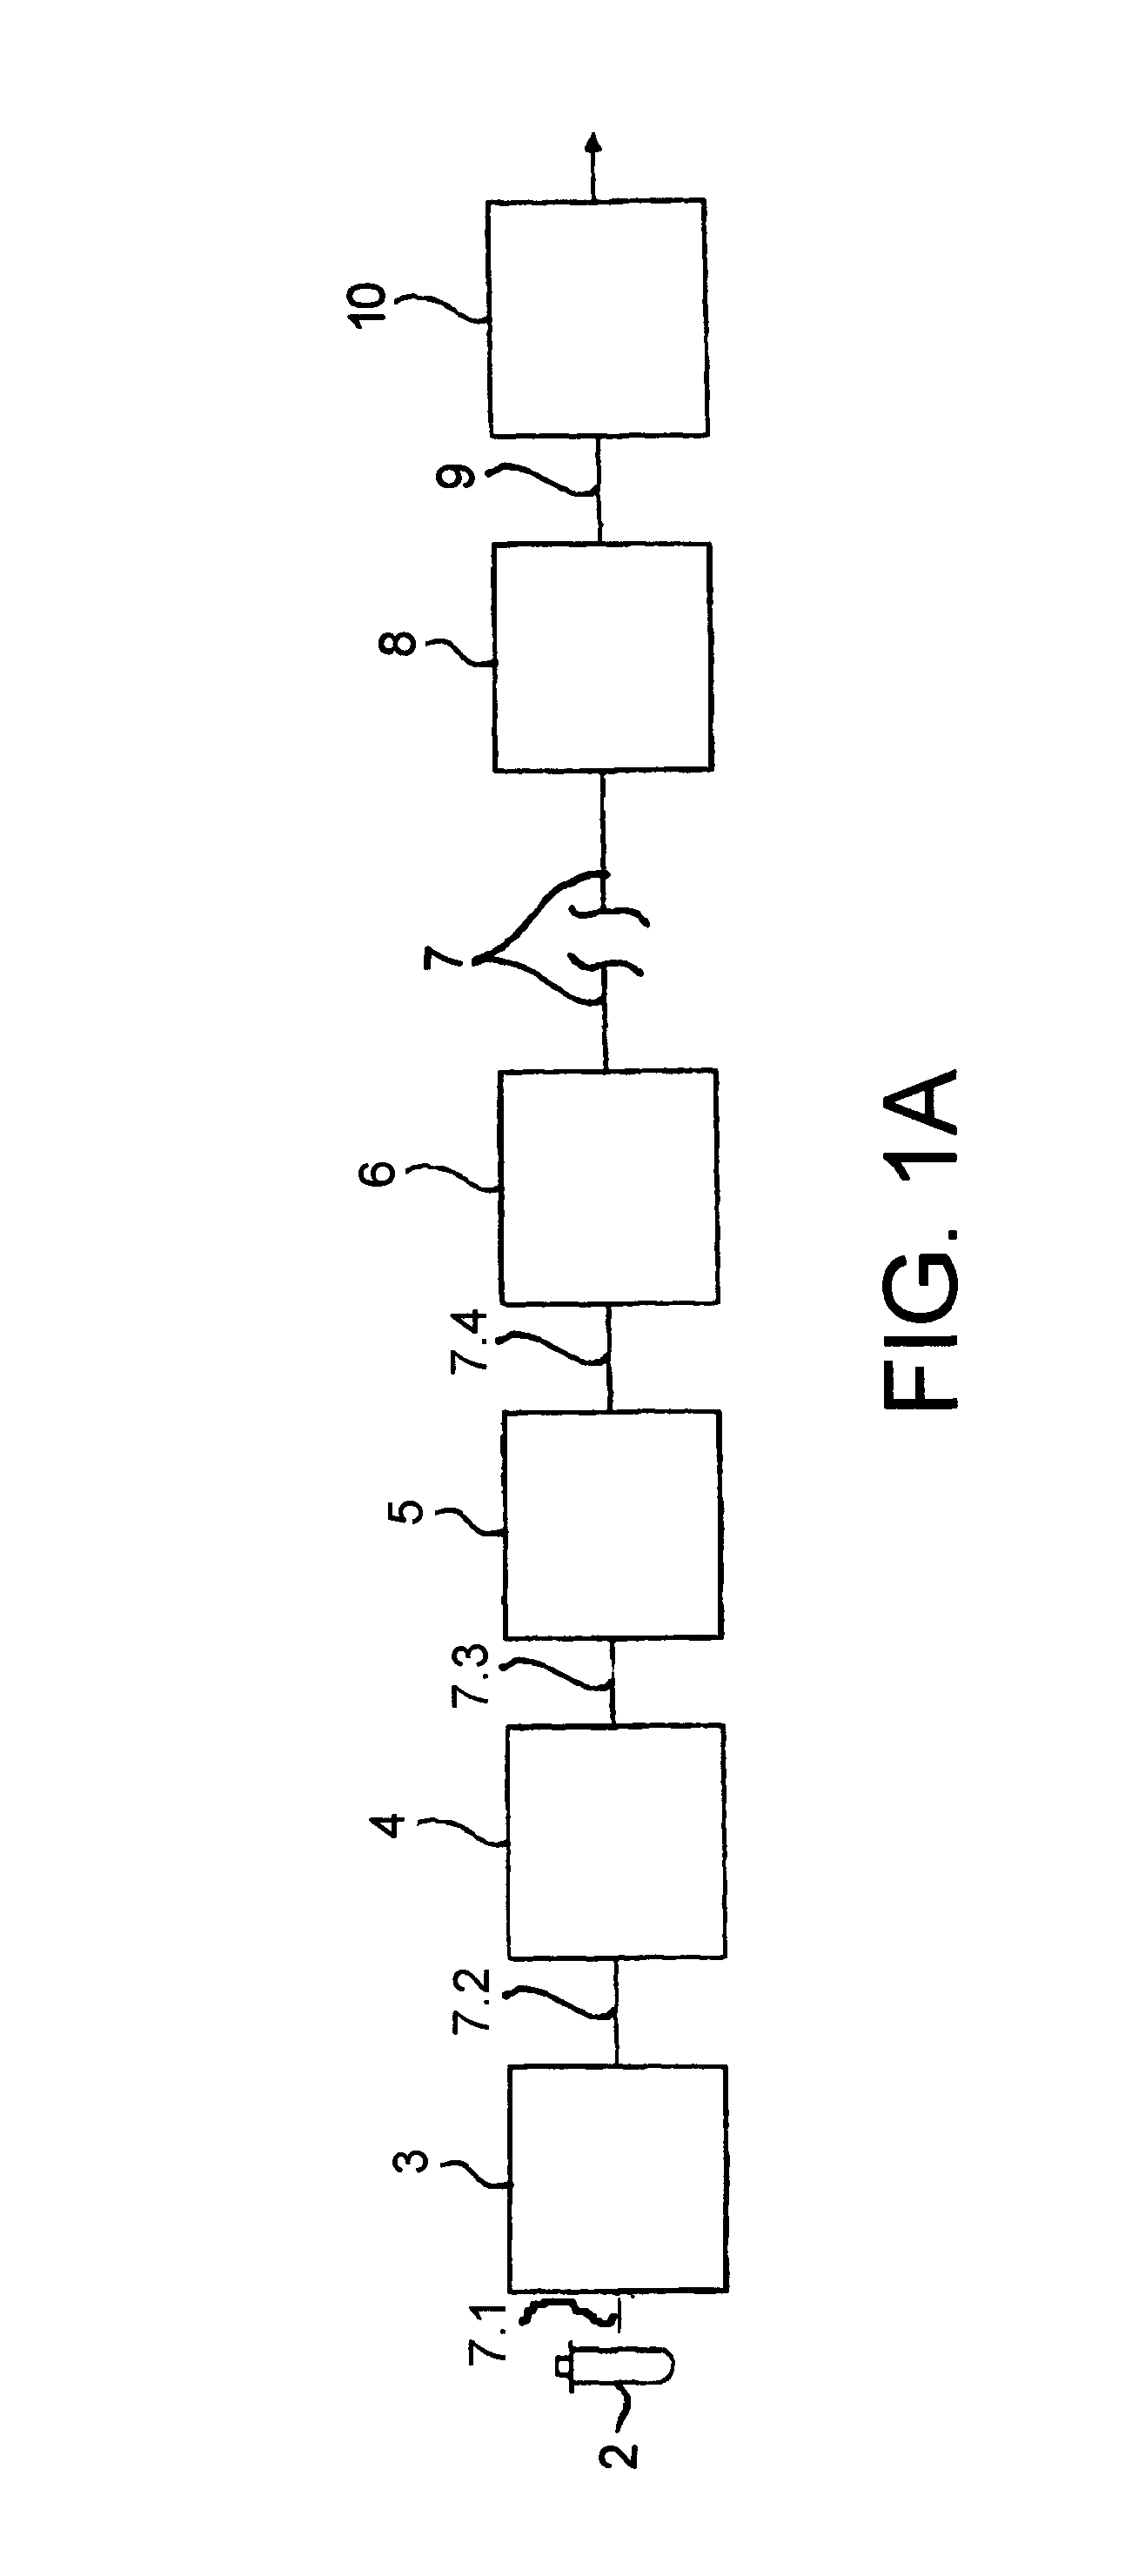 Method for spraying the exterior surfaces of blow molded plastic beverage bottles with a treatment to minimize, restrict, or inhibit bottle jams during the use of an air transport system in a bottle plant